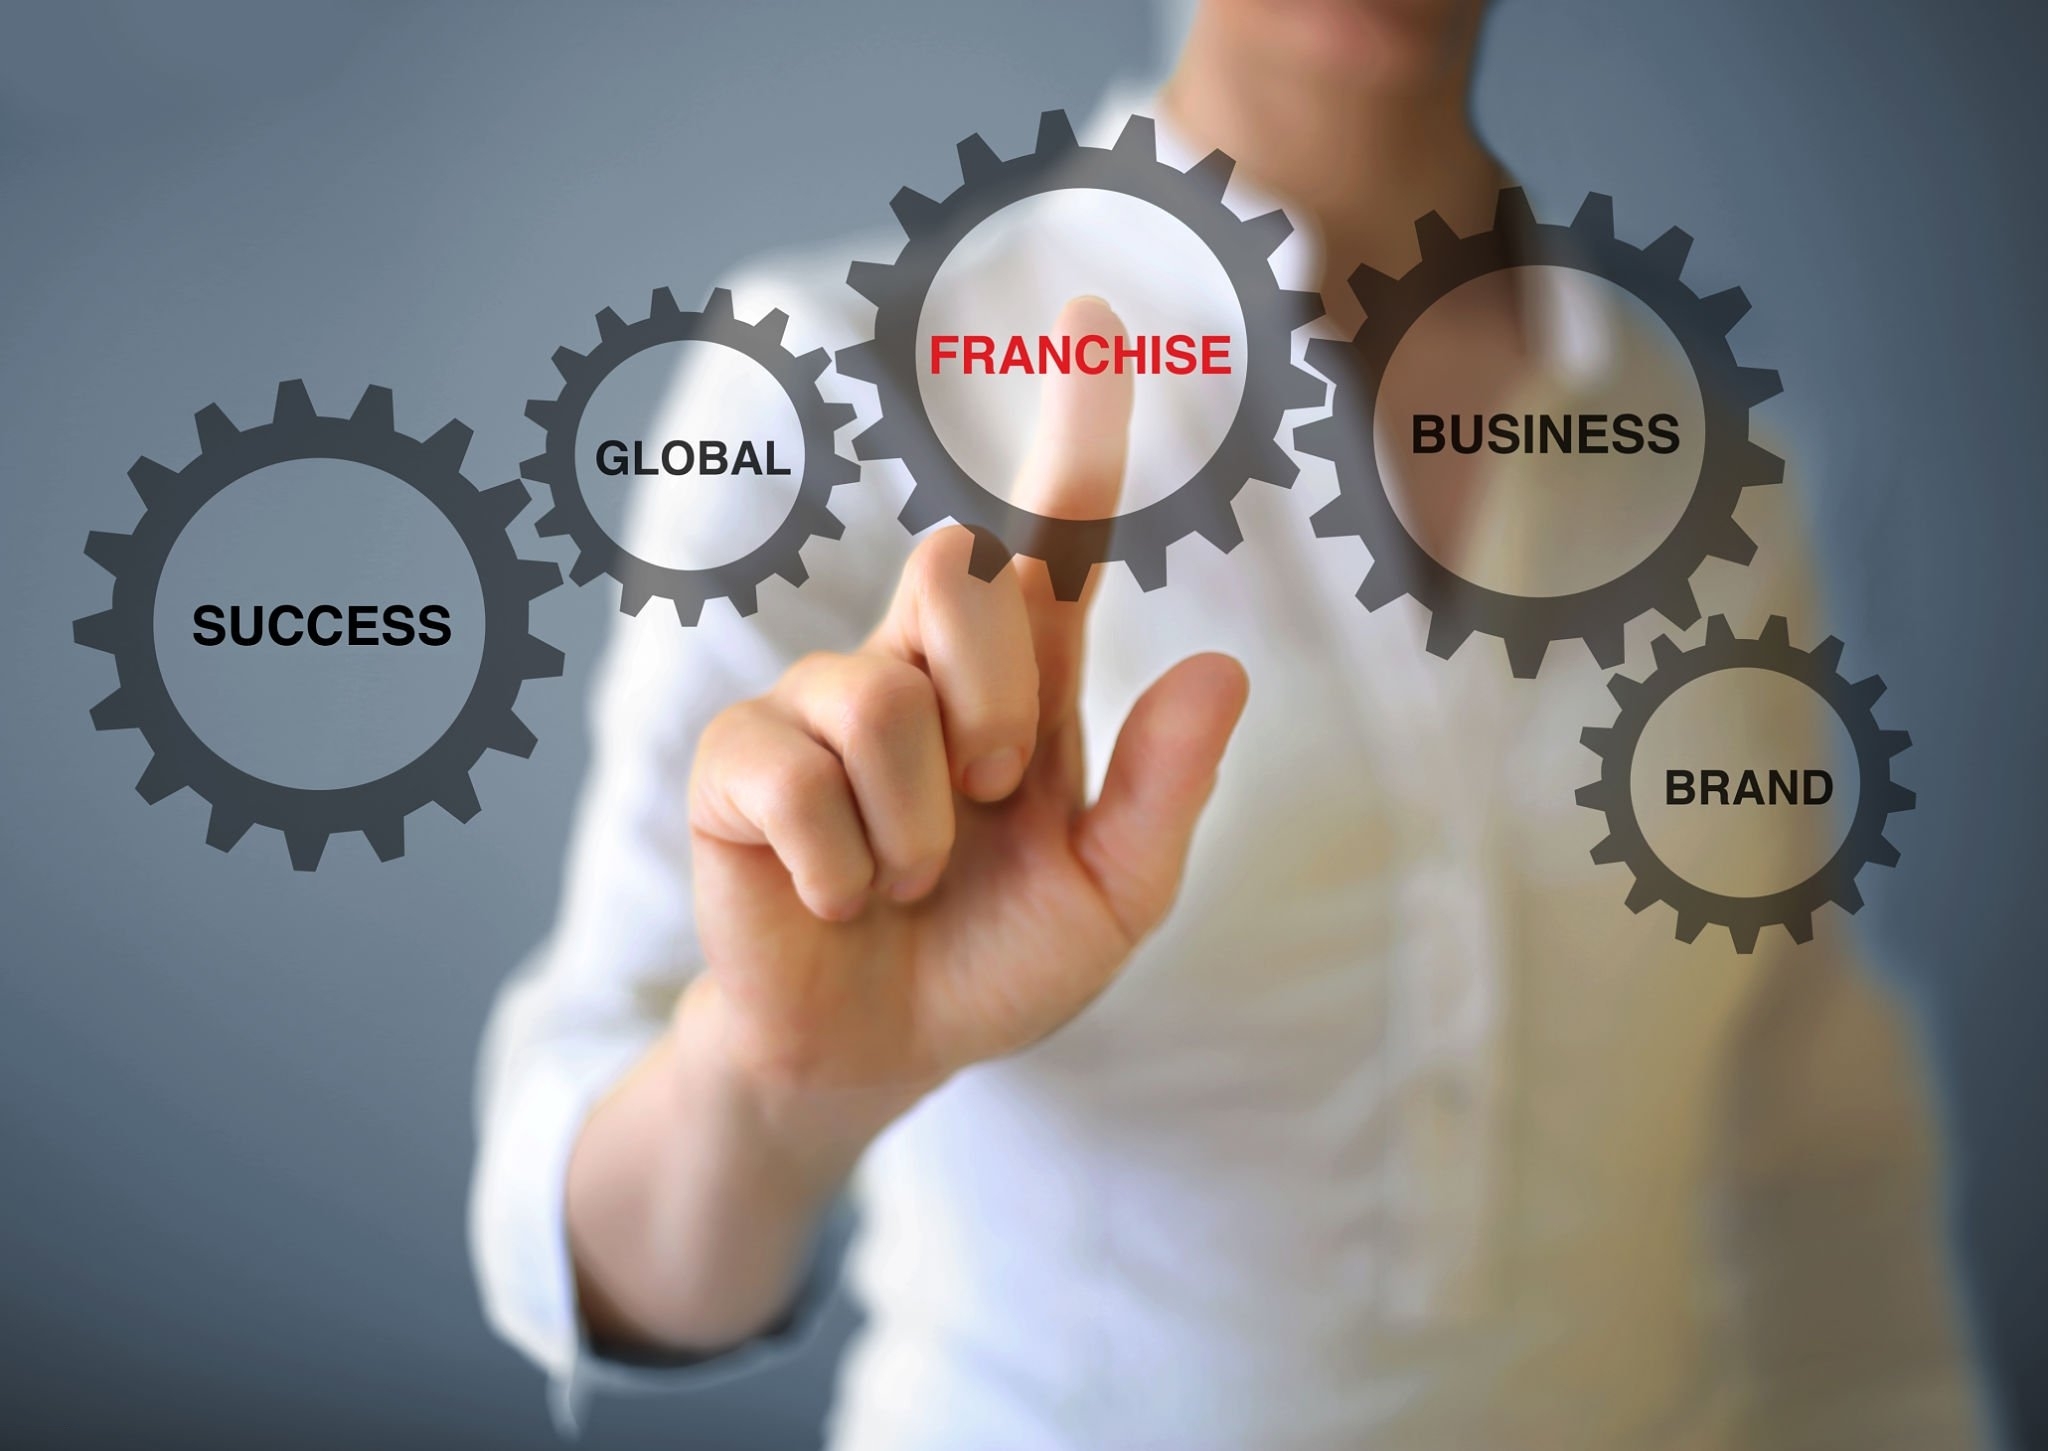 Franchising Path | Franchise vs. Start-up: Entrepreneurs Can Enjoy All the Benefits Without the Risk